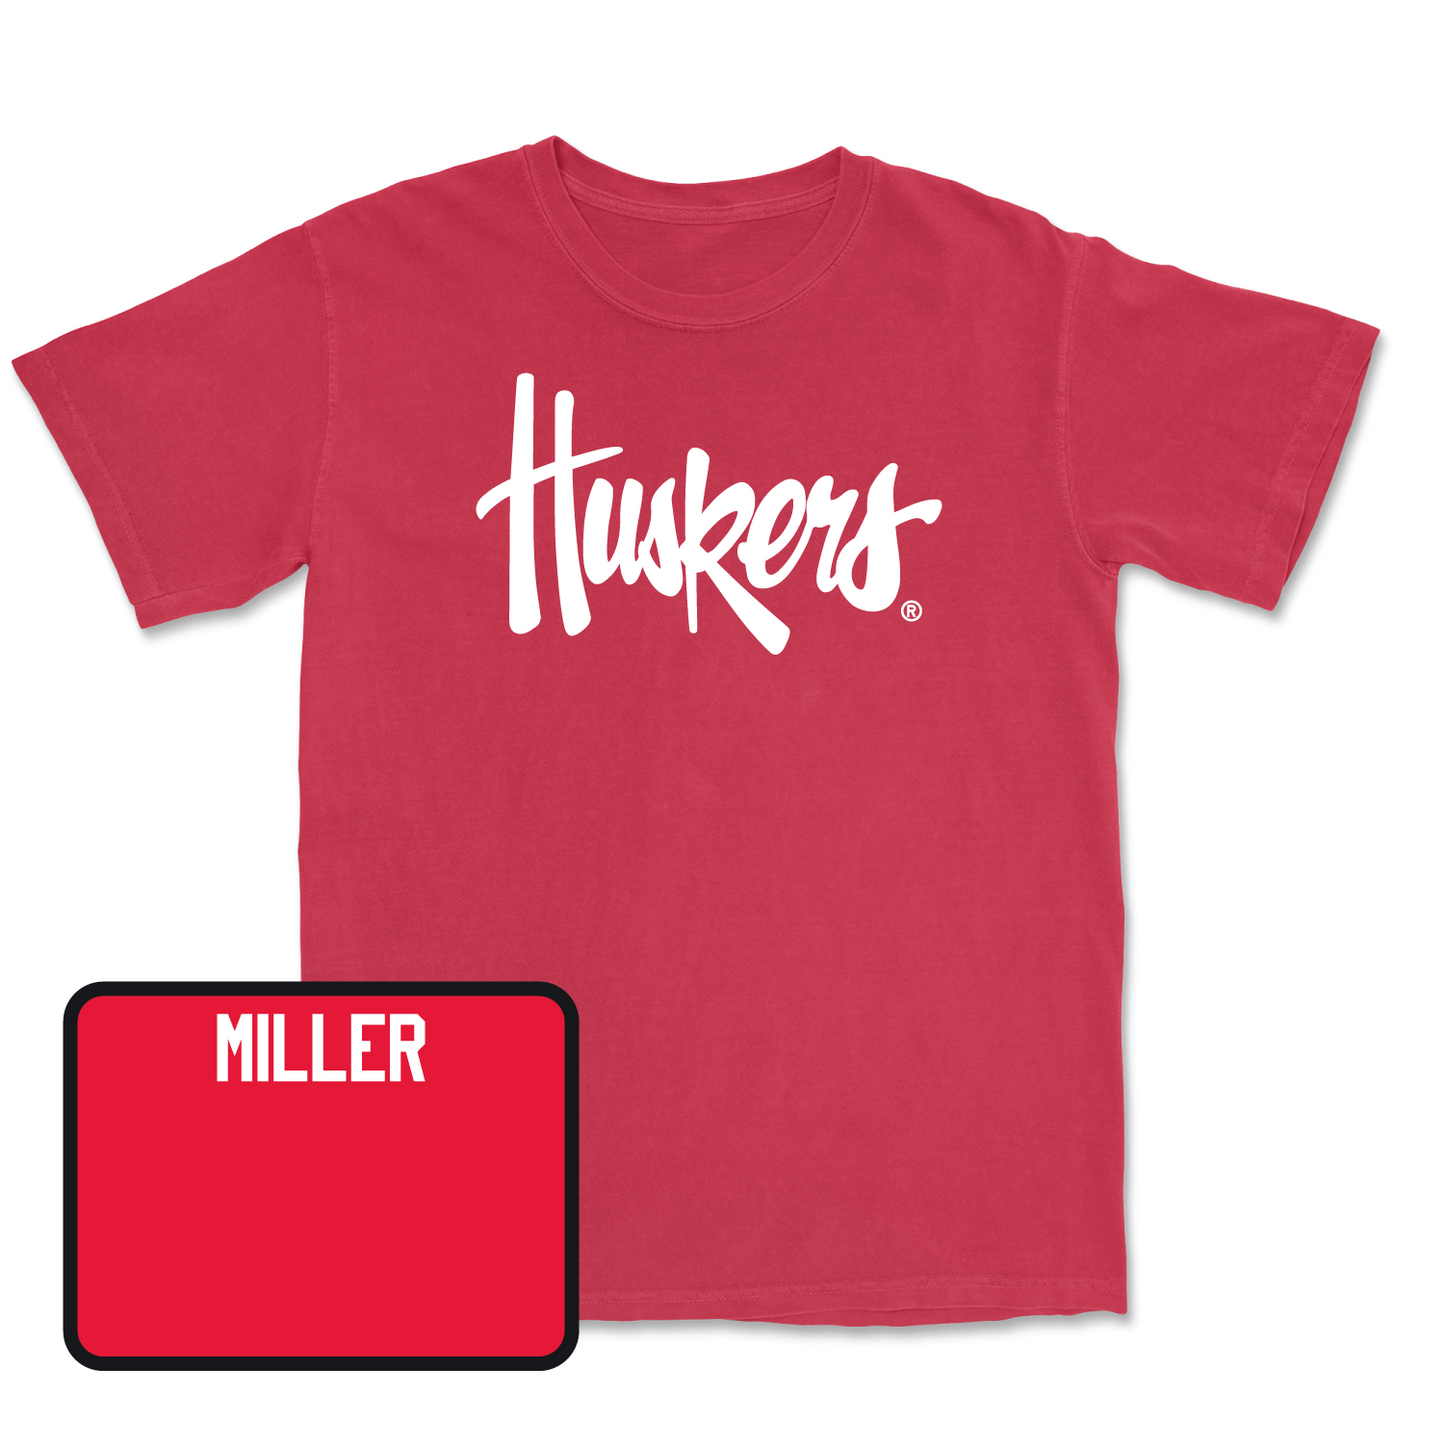 Red Track & Field Huskers Tee Large / Brooklyn Miller